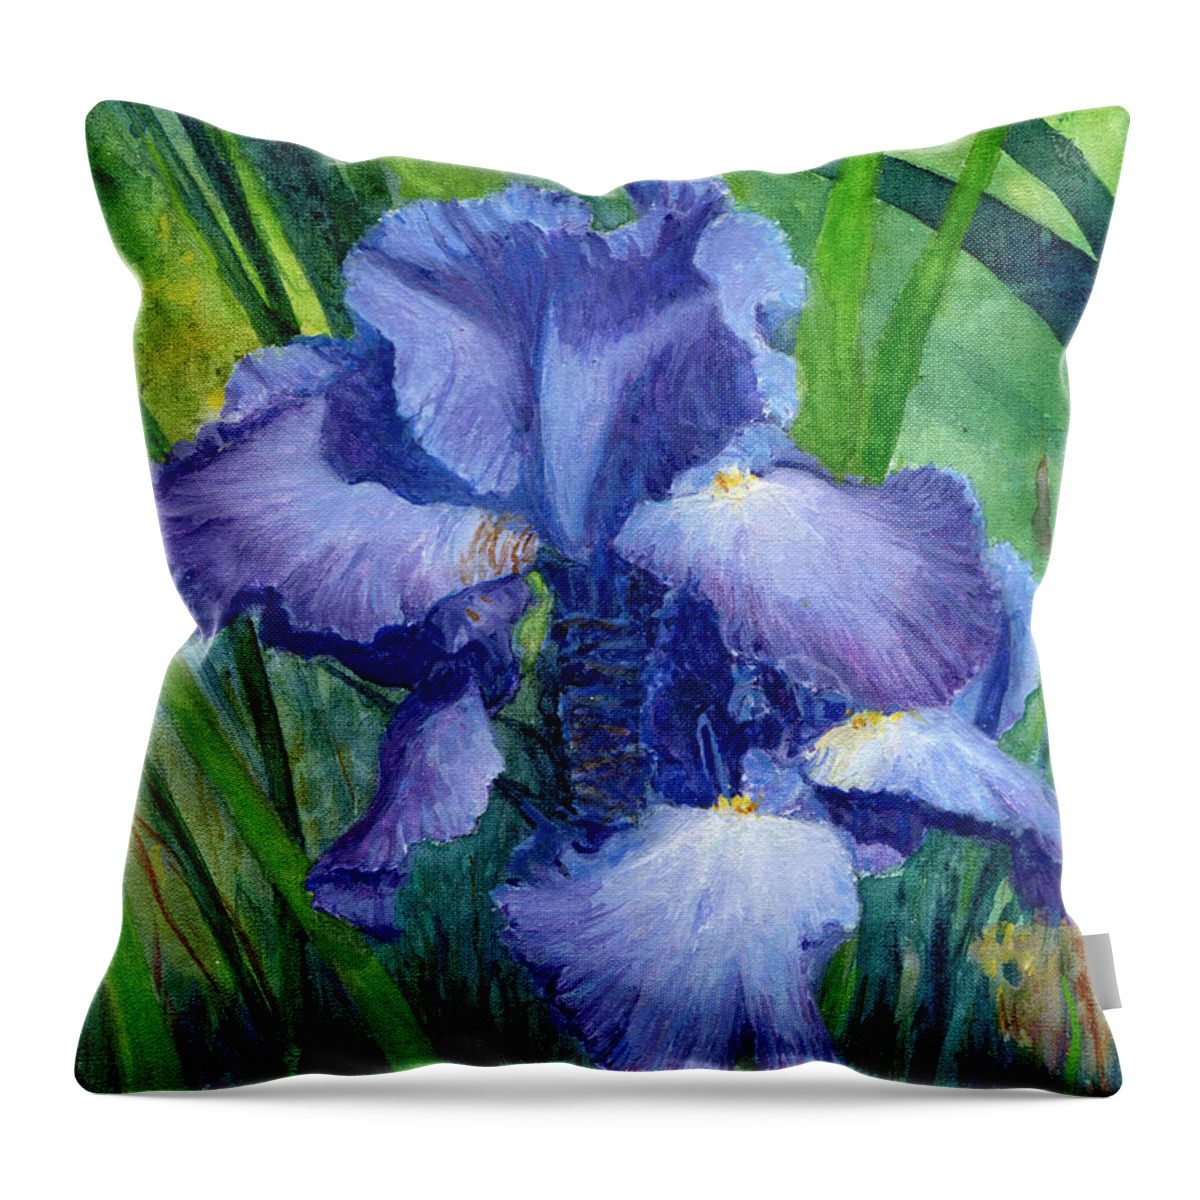 Iris Throw Pillow featuring the painting Iris by June Hunt